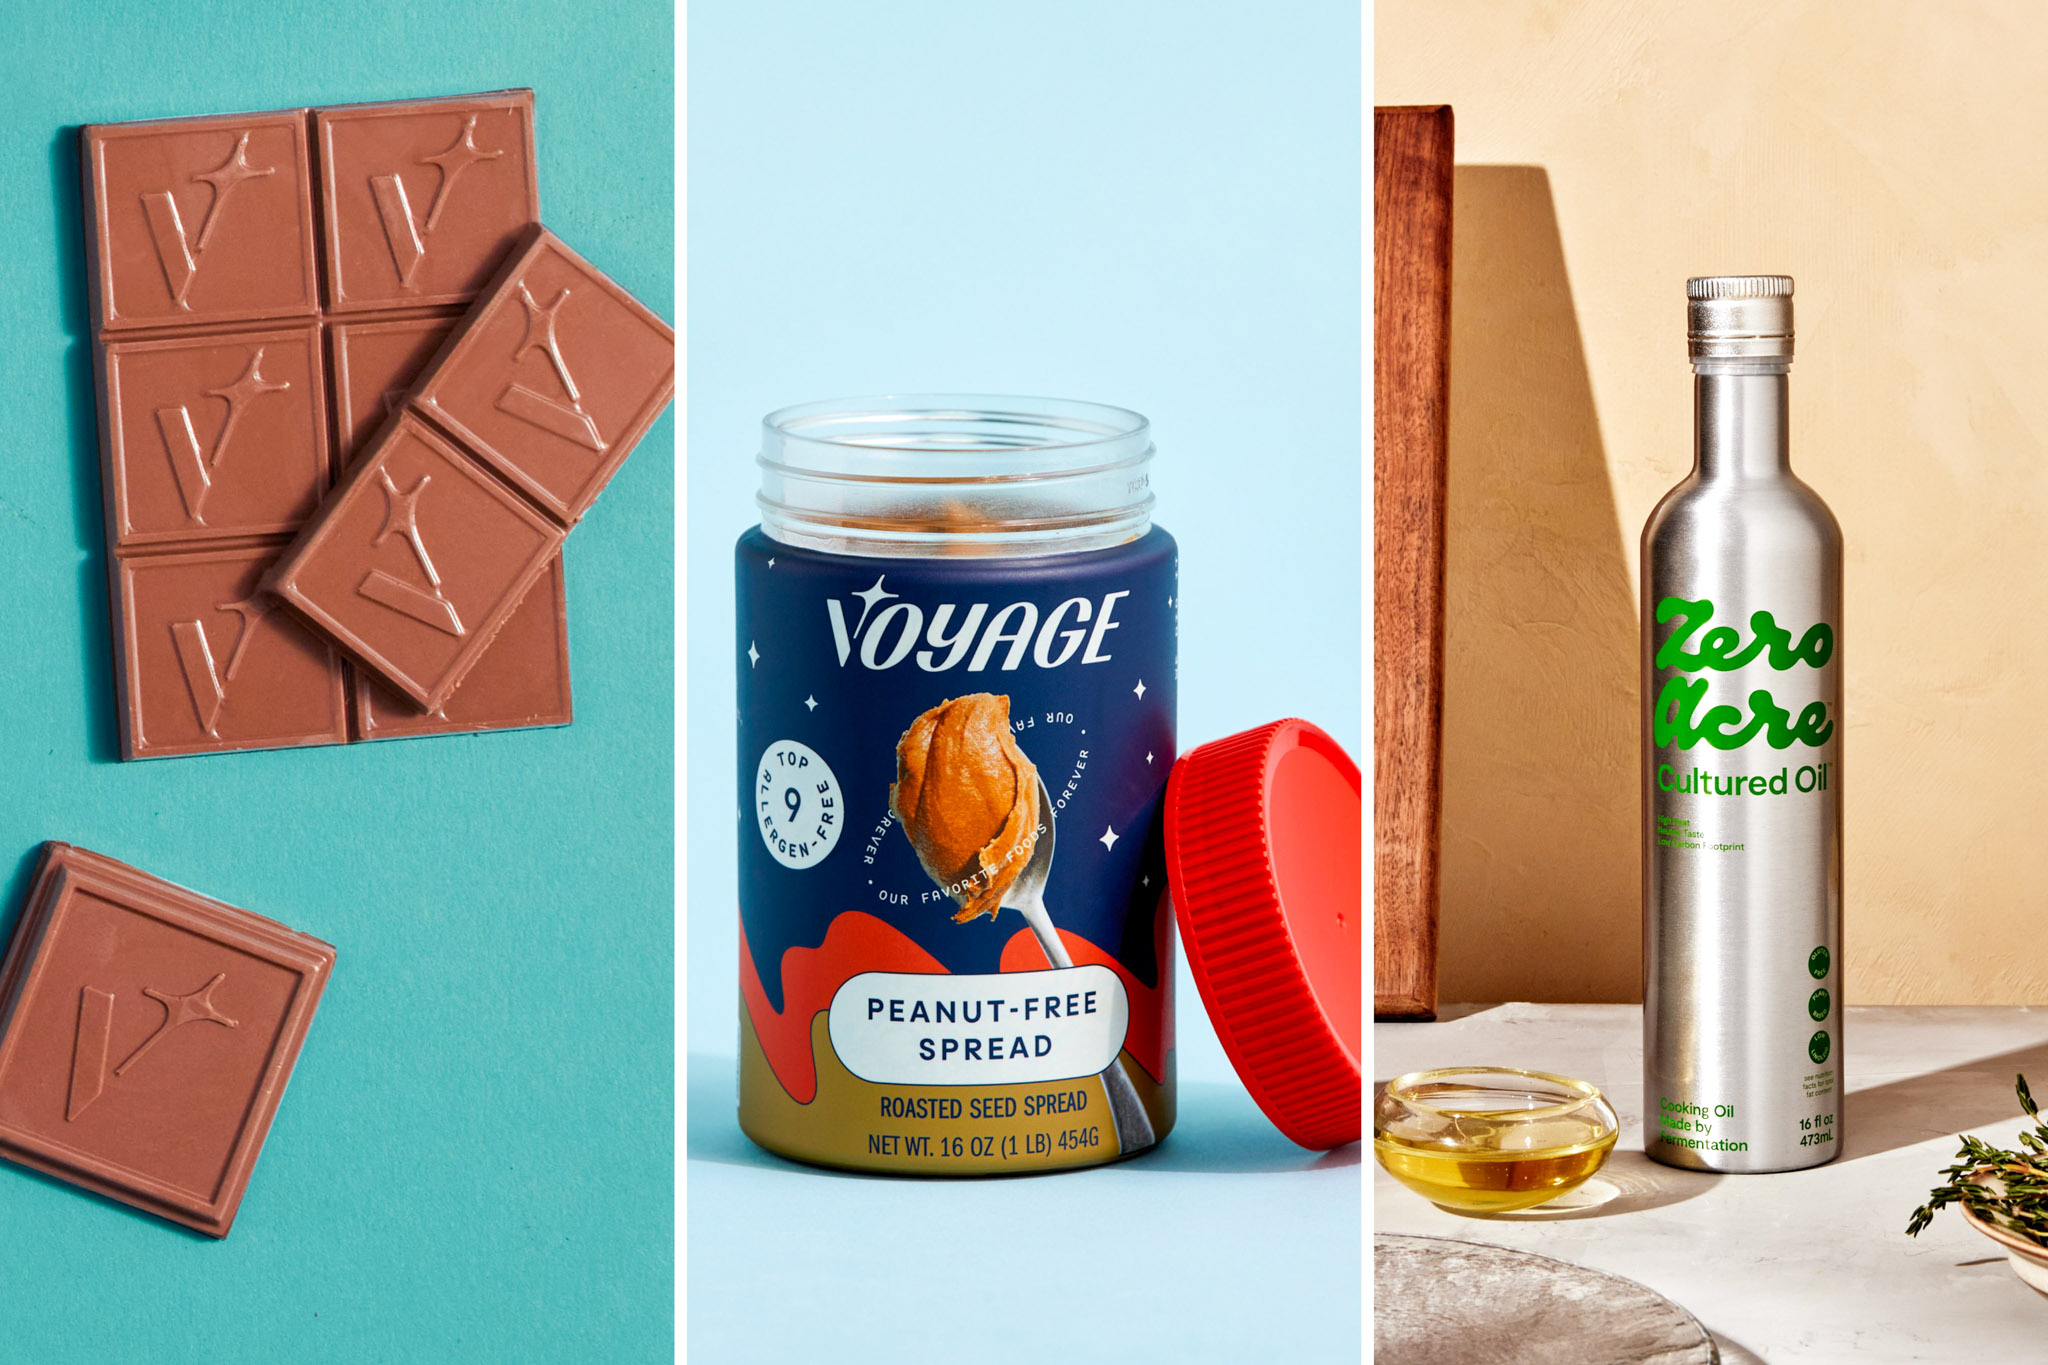 We Tried Chocolate Without the Chocolate. Here’s How It Went